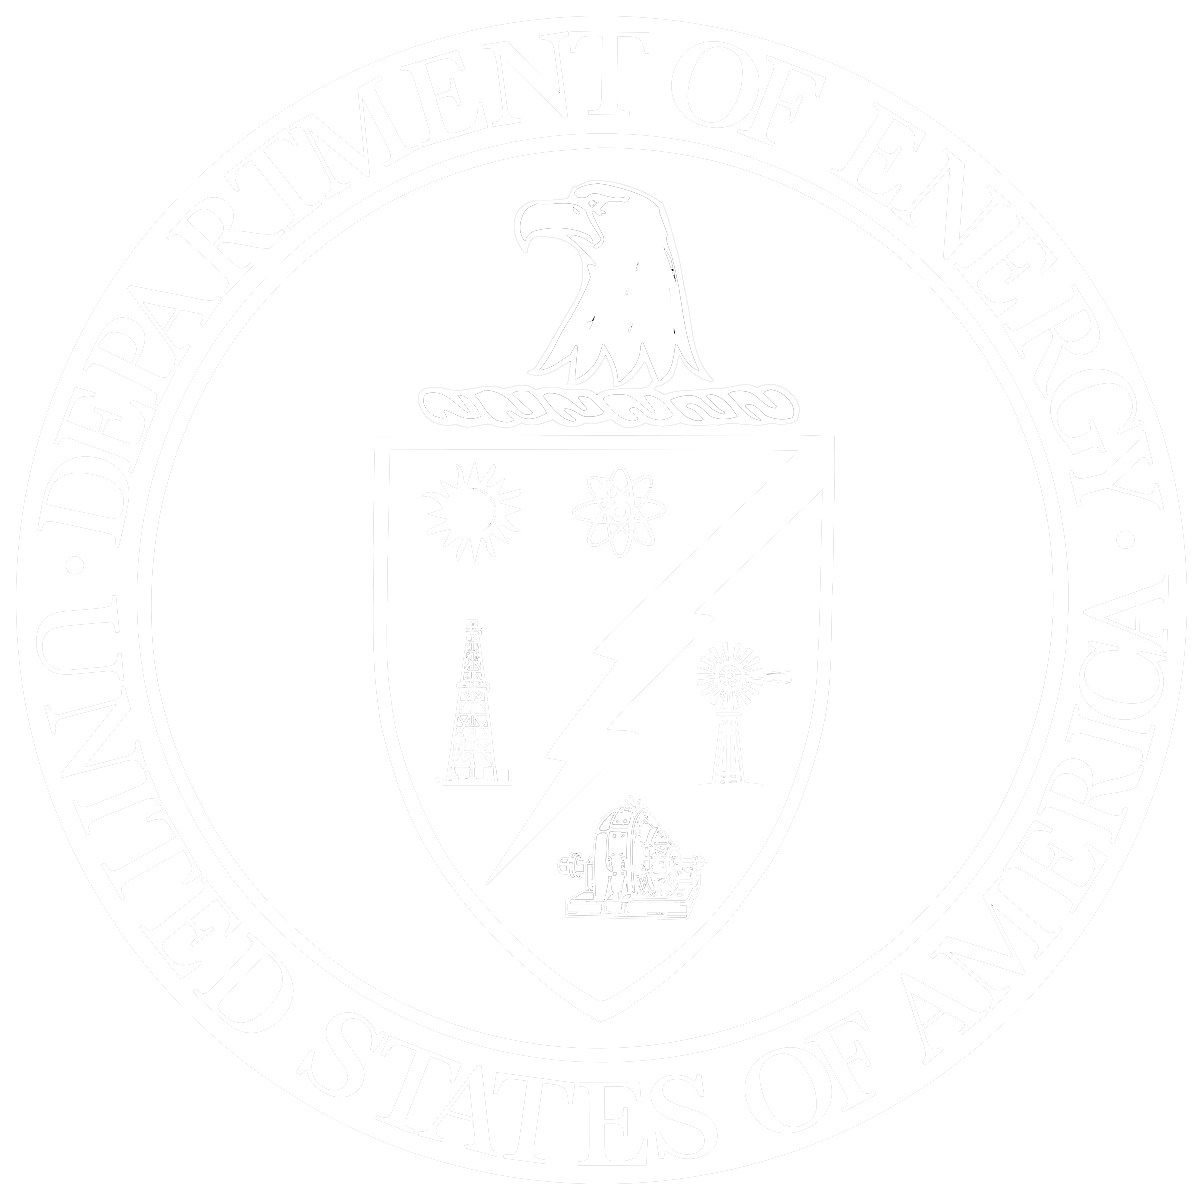 department-of-energy